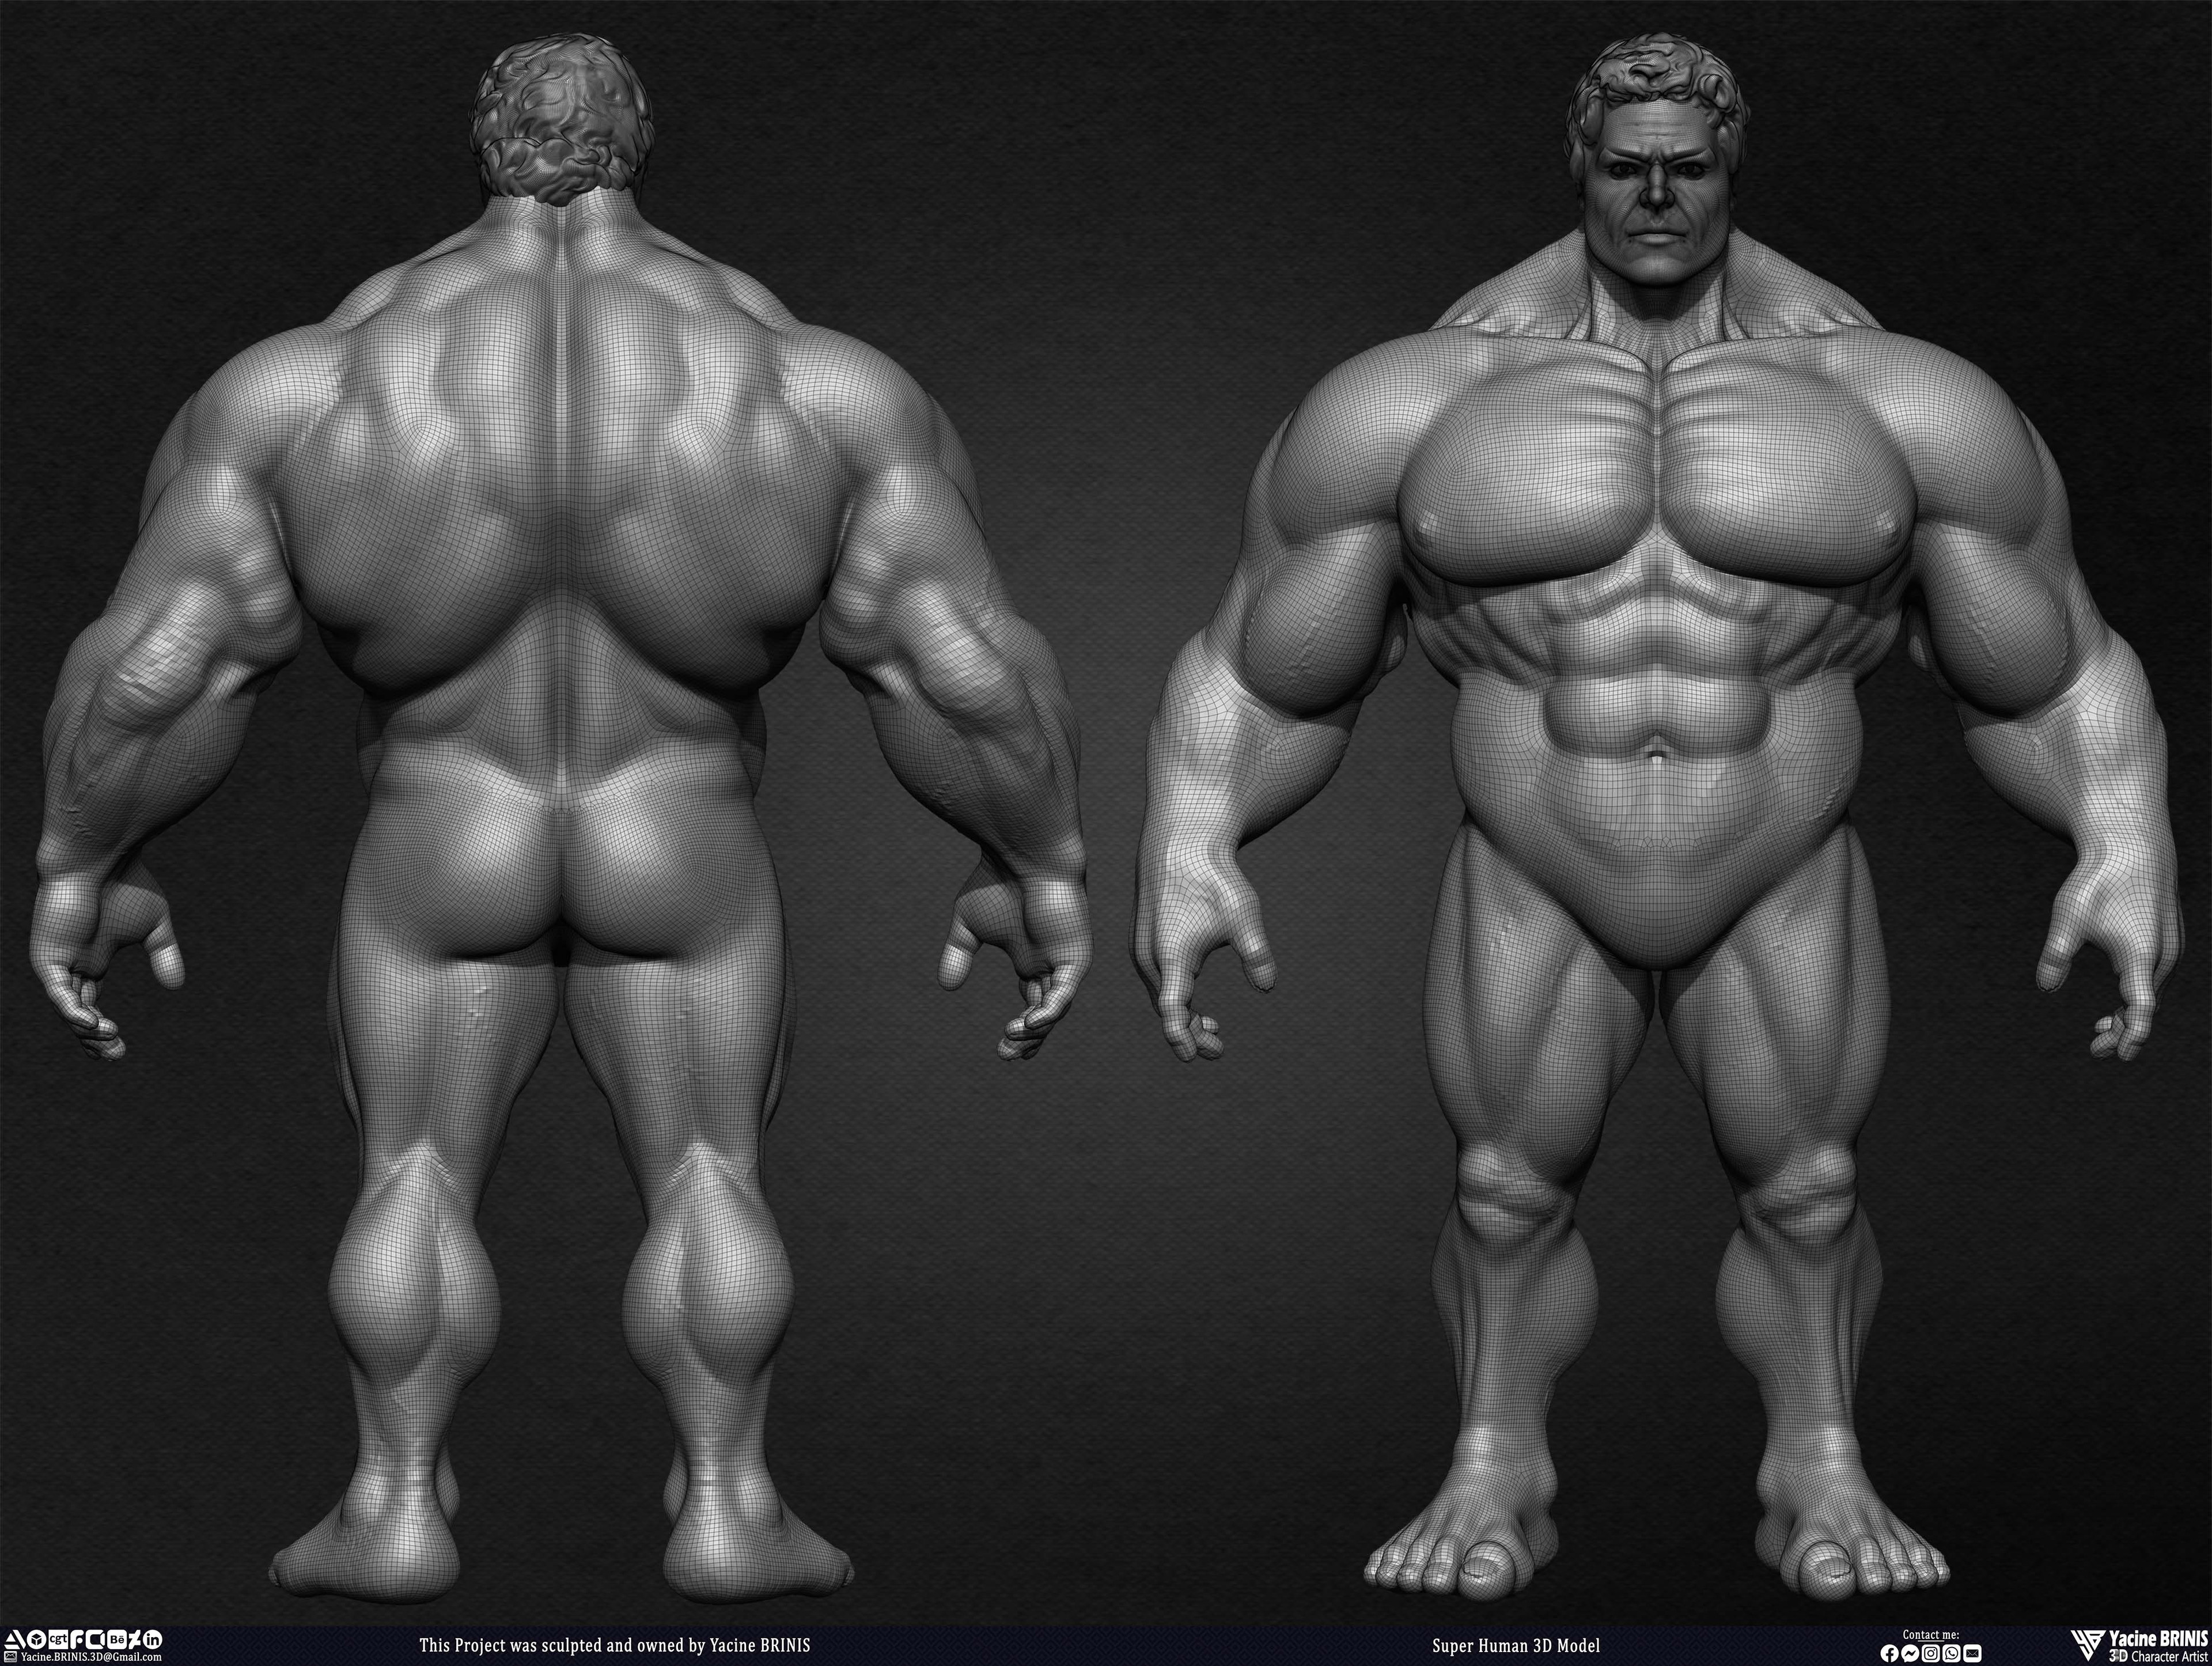 Super Human 3D Model sculpted by Yacine BRINIS 009